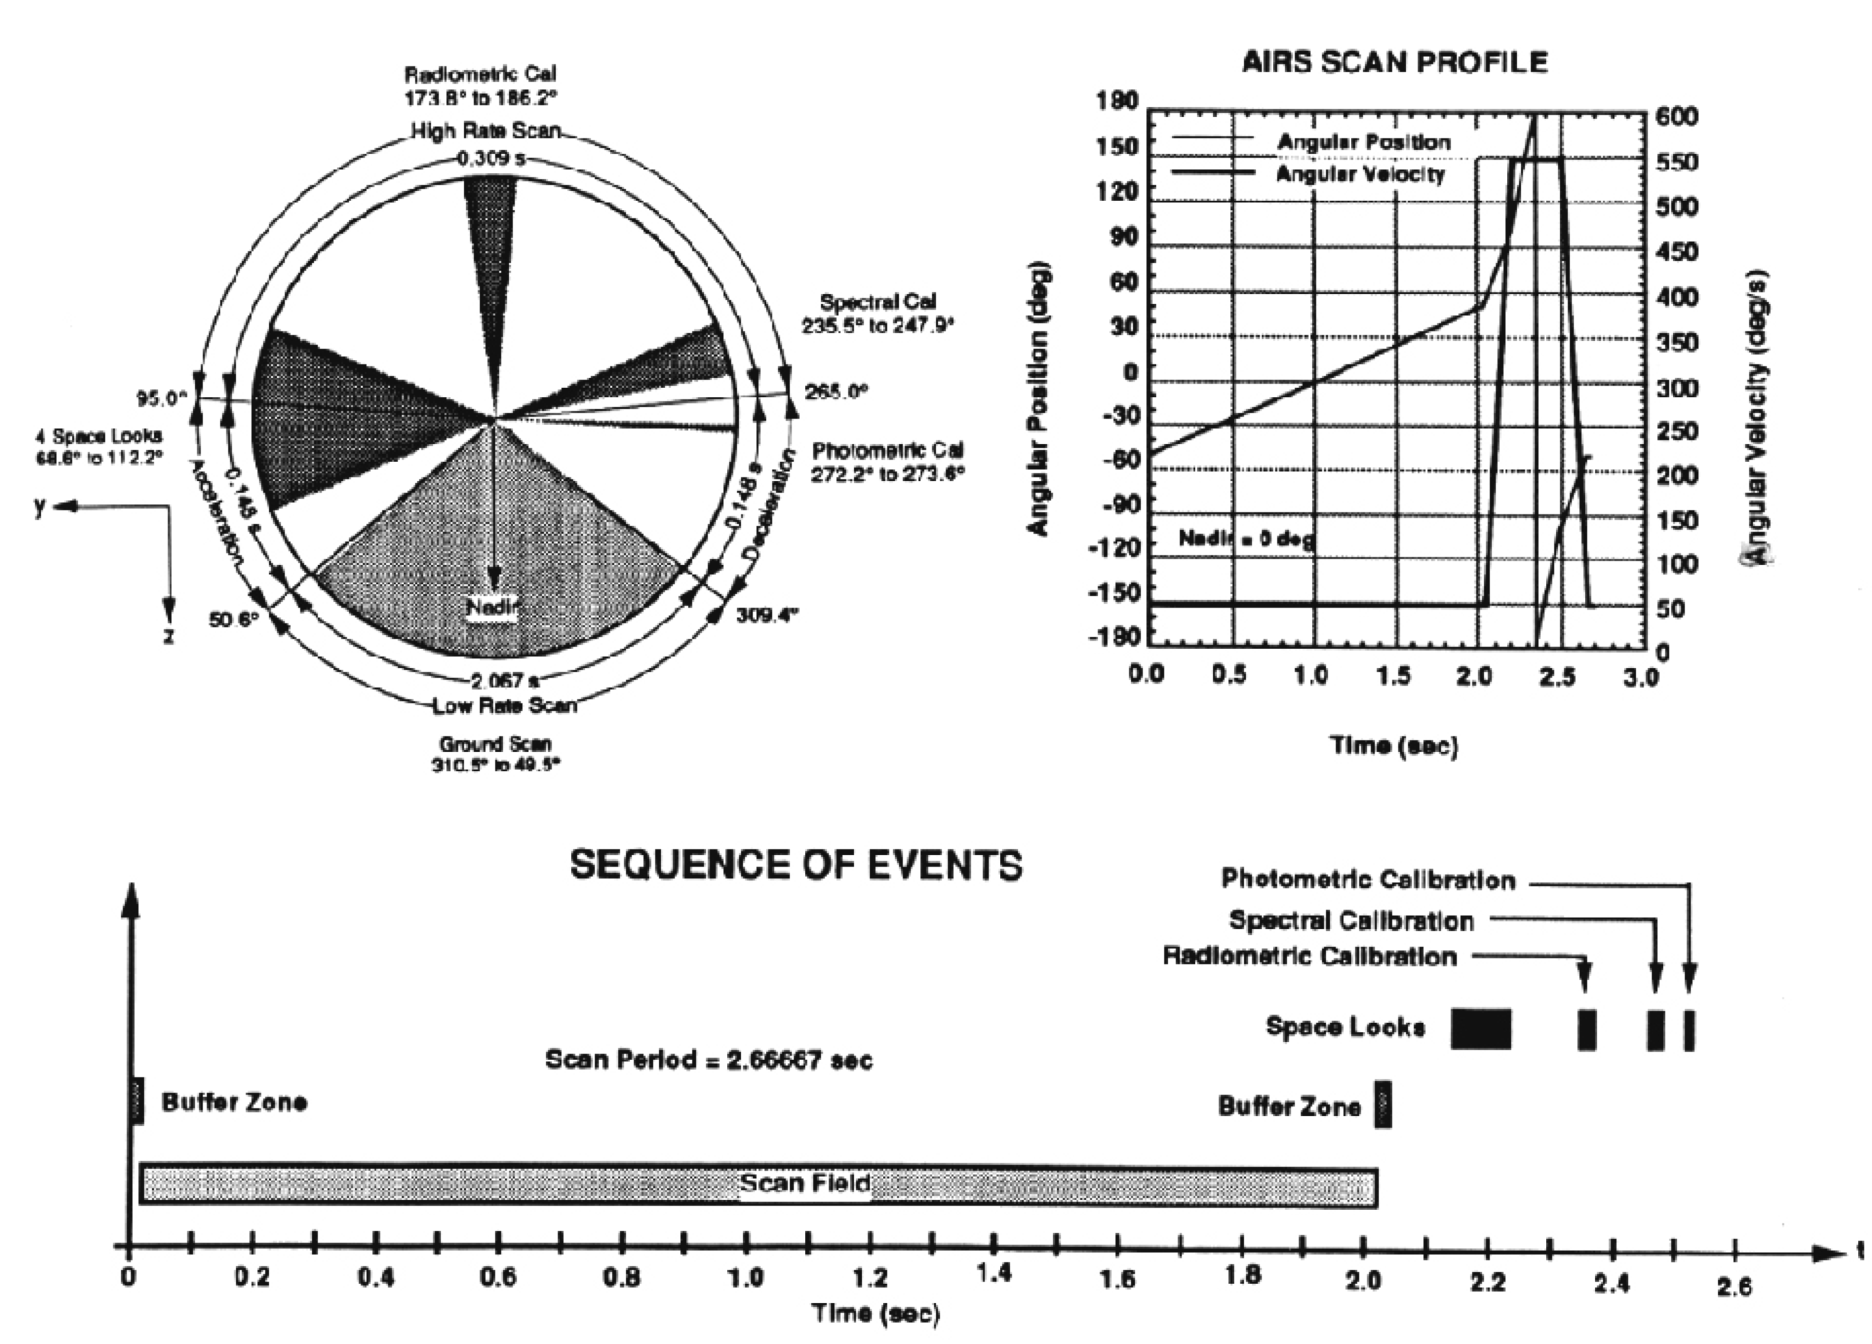 timing diagram and sequence of events for the AIRS scan system